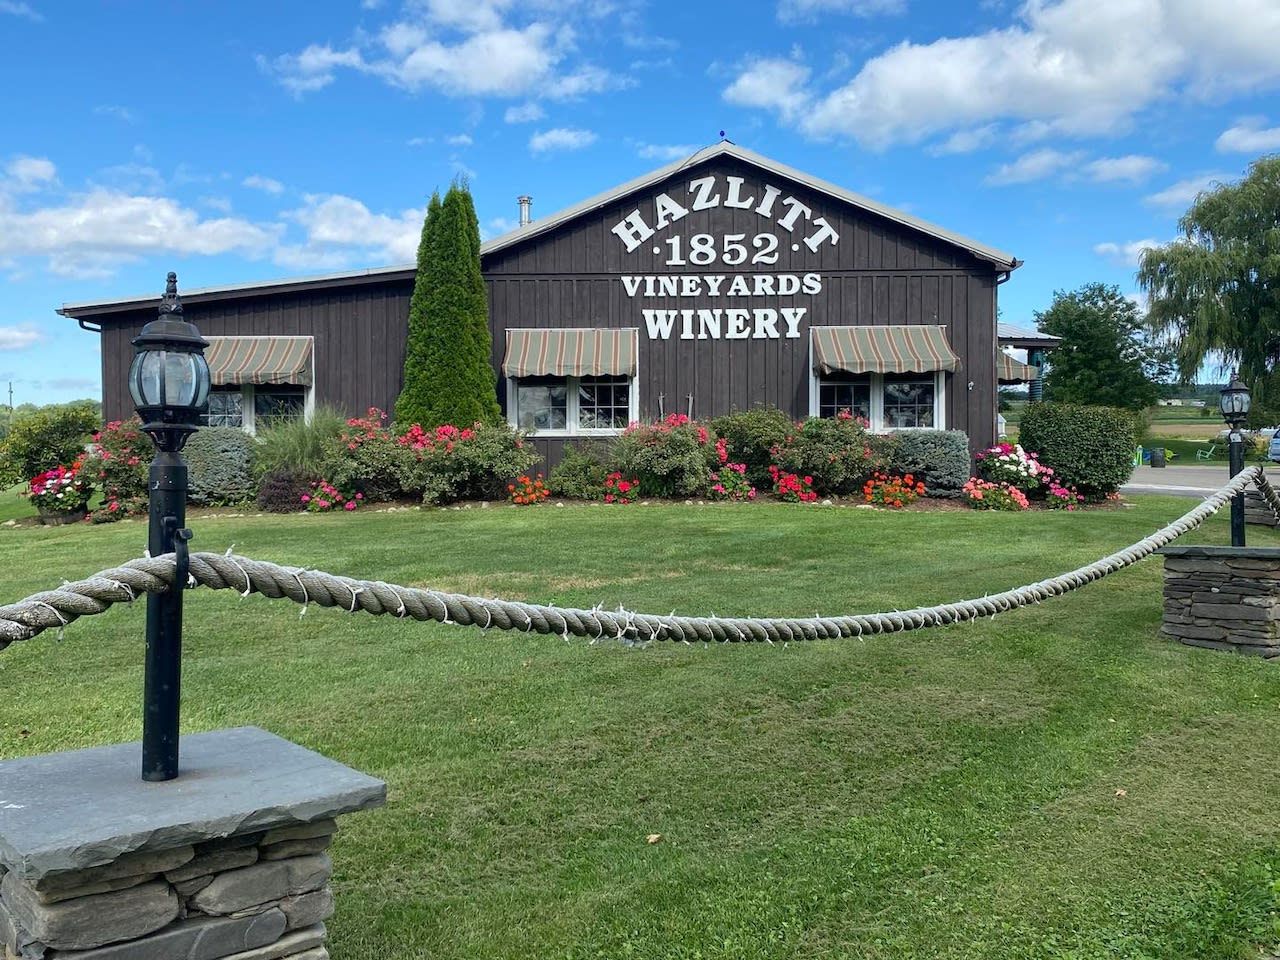 Red Cat puts Finger Lakes winery on the map, but there are plenty more reasons to visit